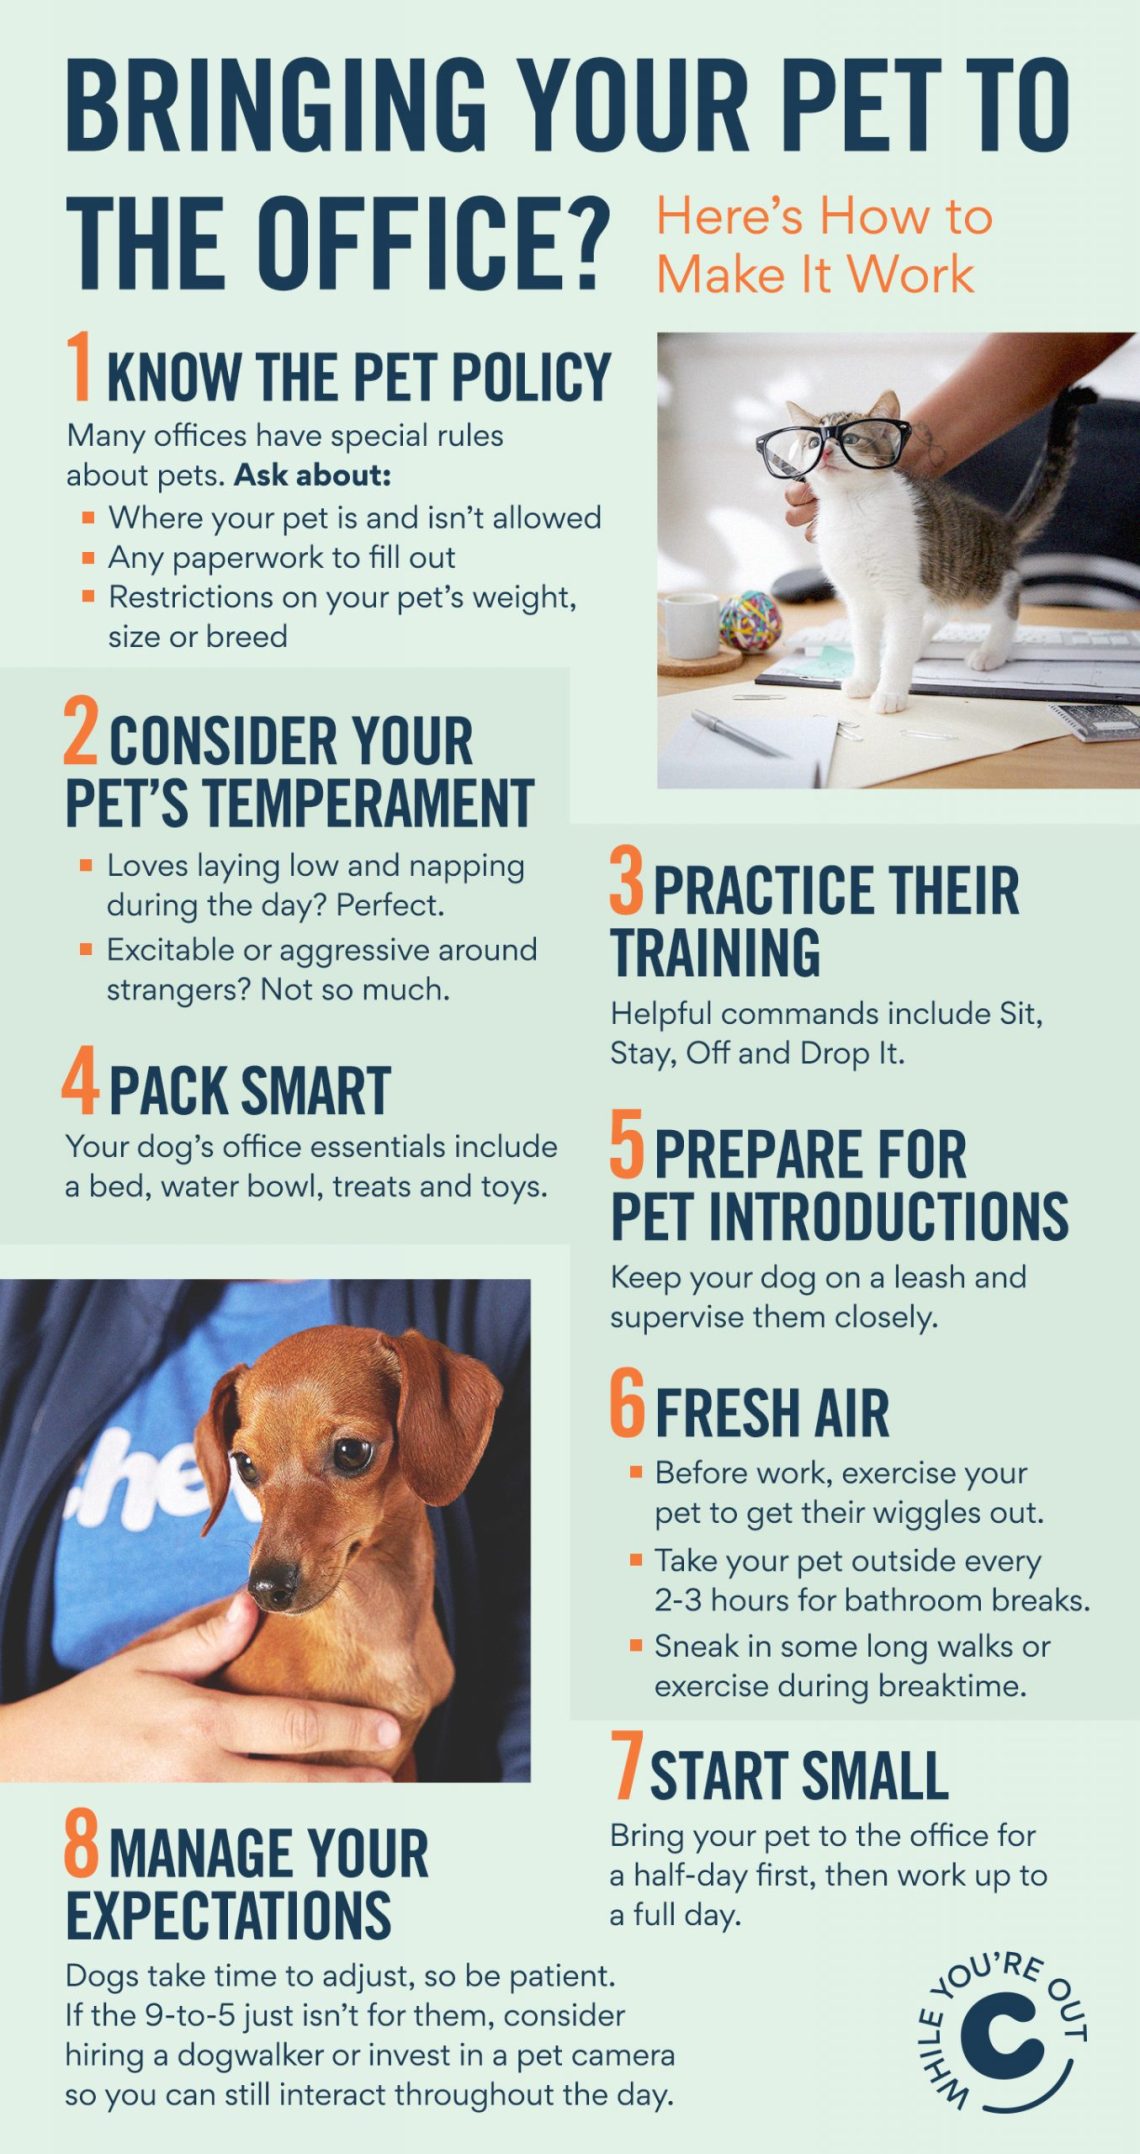 Take Your Dog to Work: Practical Tips